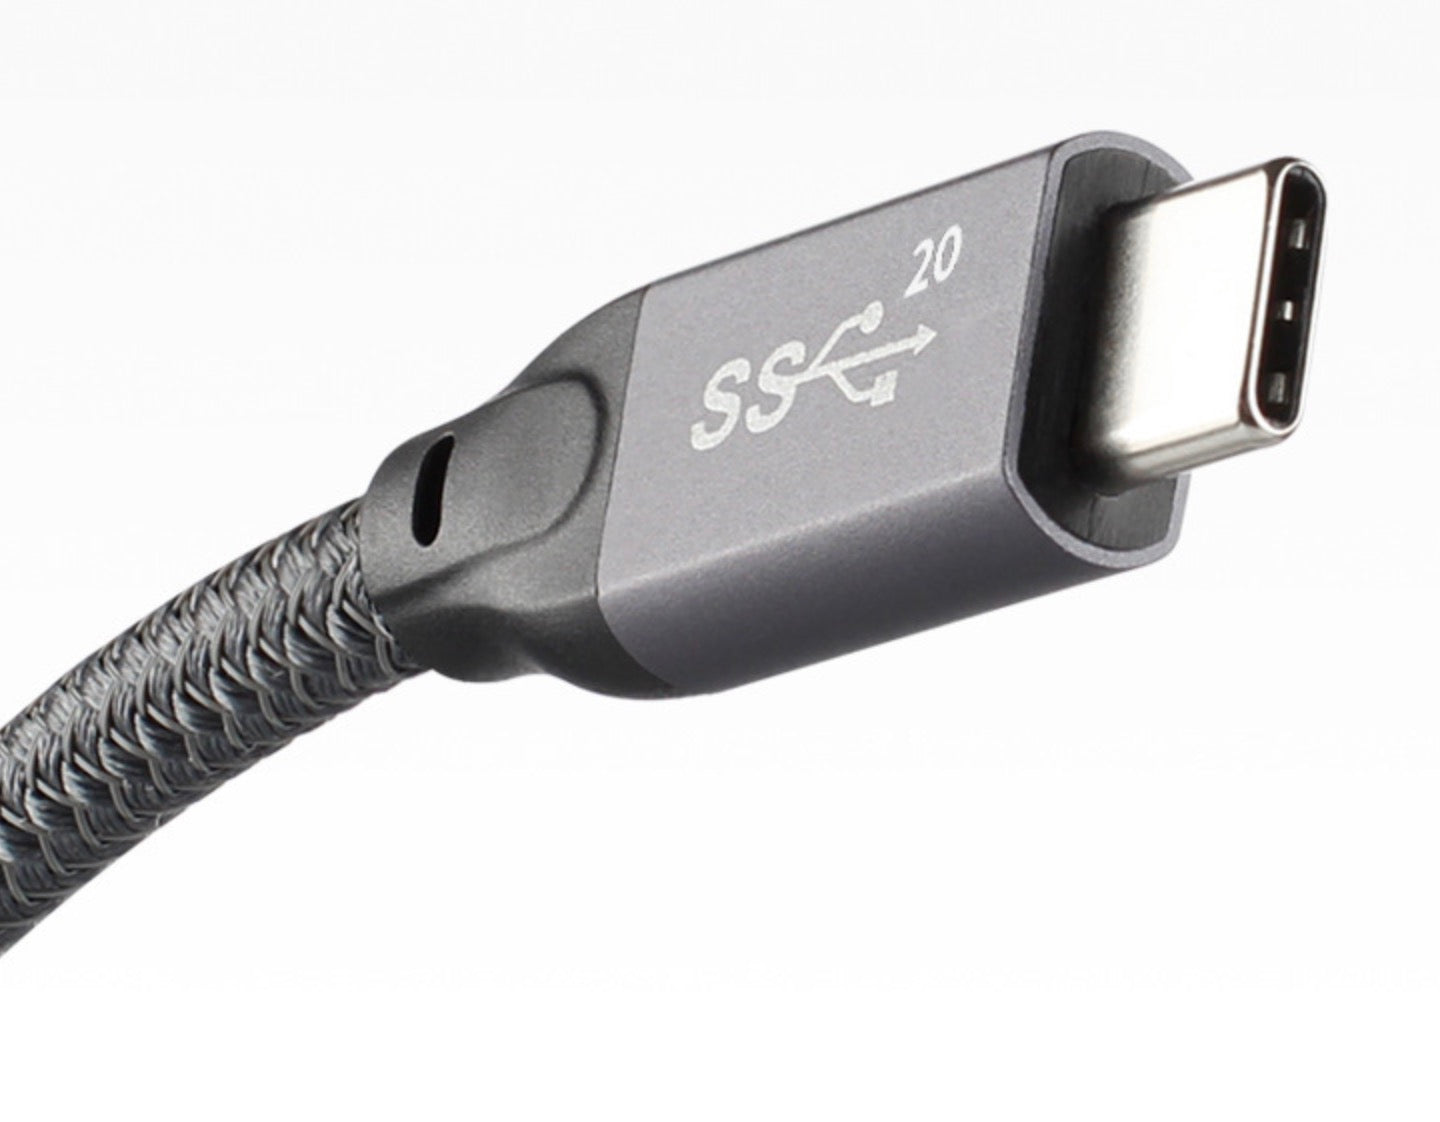 USB-C 3.1 Gen 2 Type C PD 100W Cable with E-Marker Chip